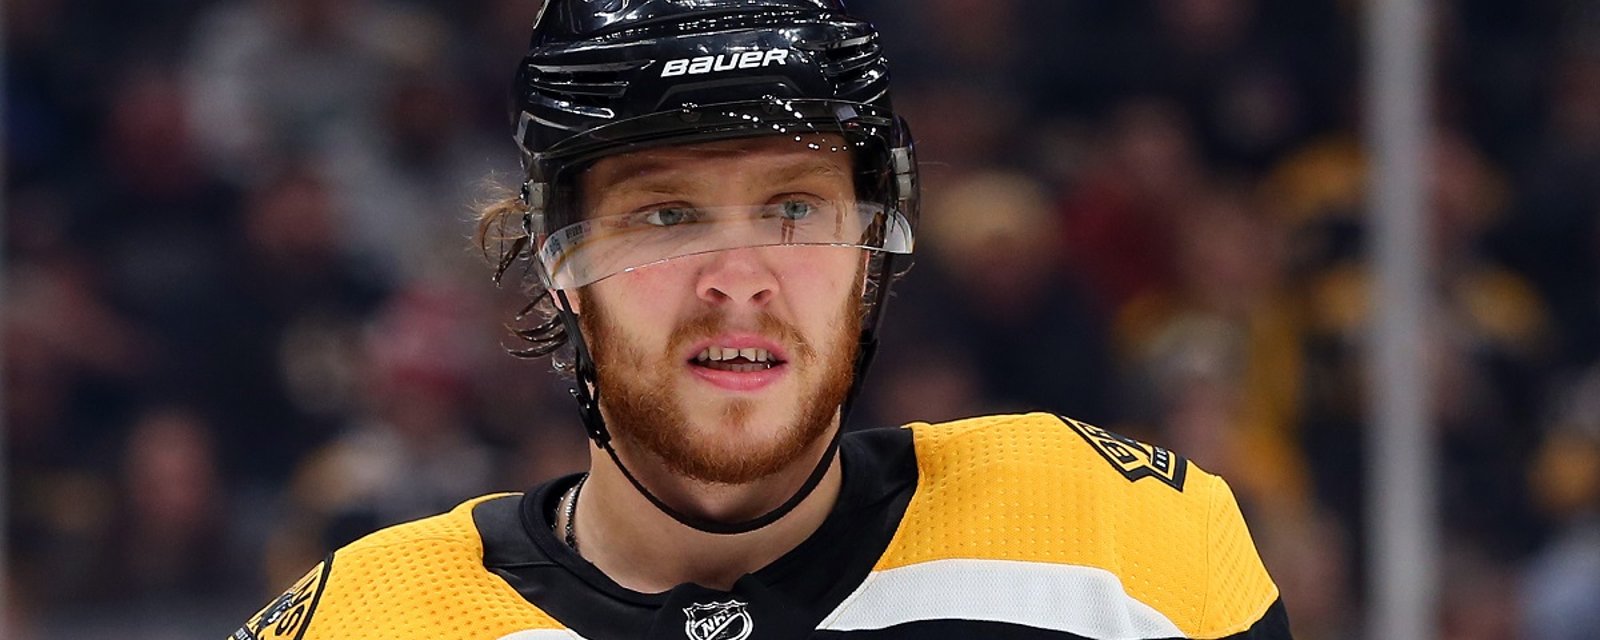 Significant updates on Pastrnak, DeBrusk and Krug coming out of Bruins practice.